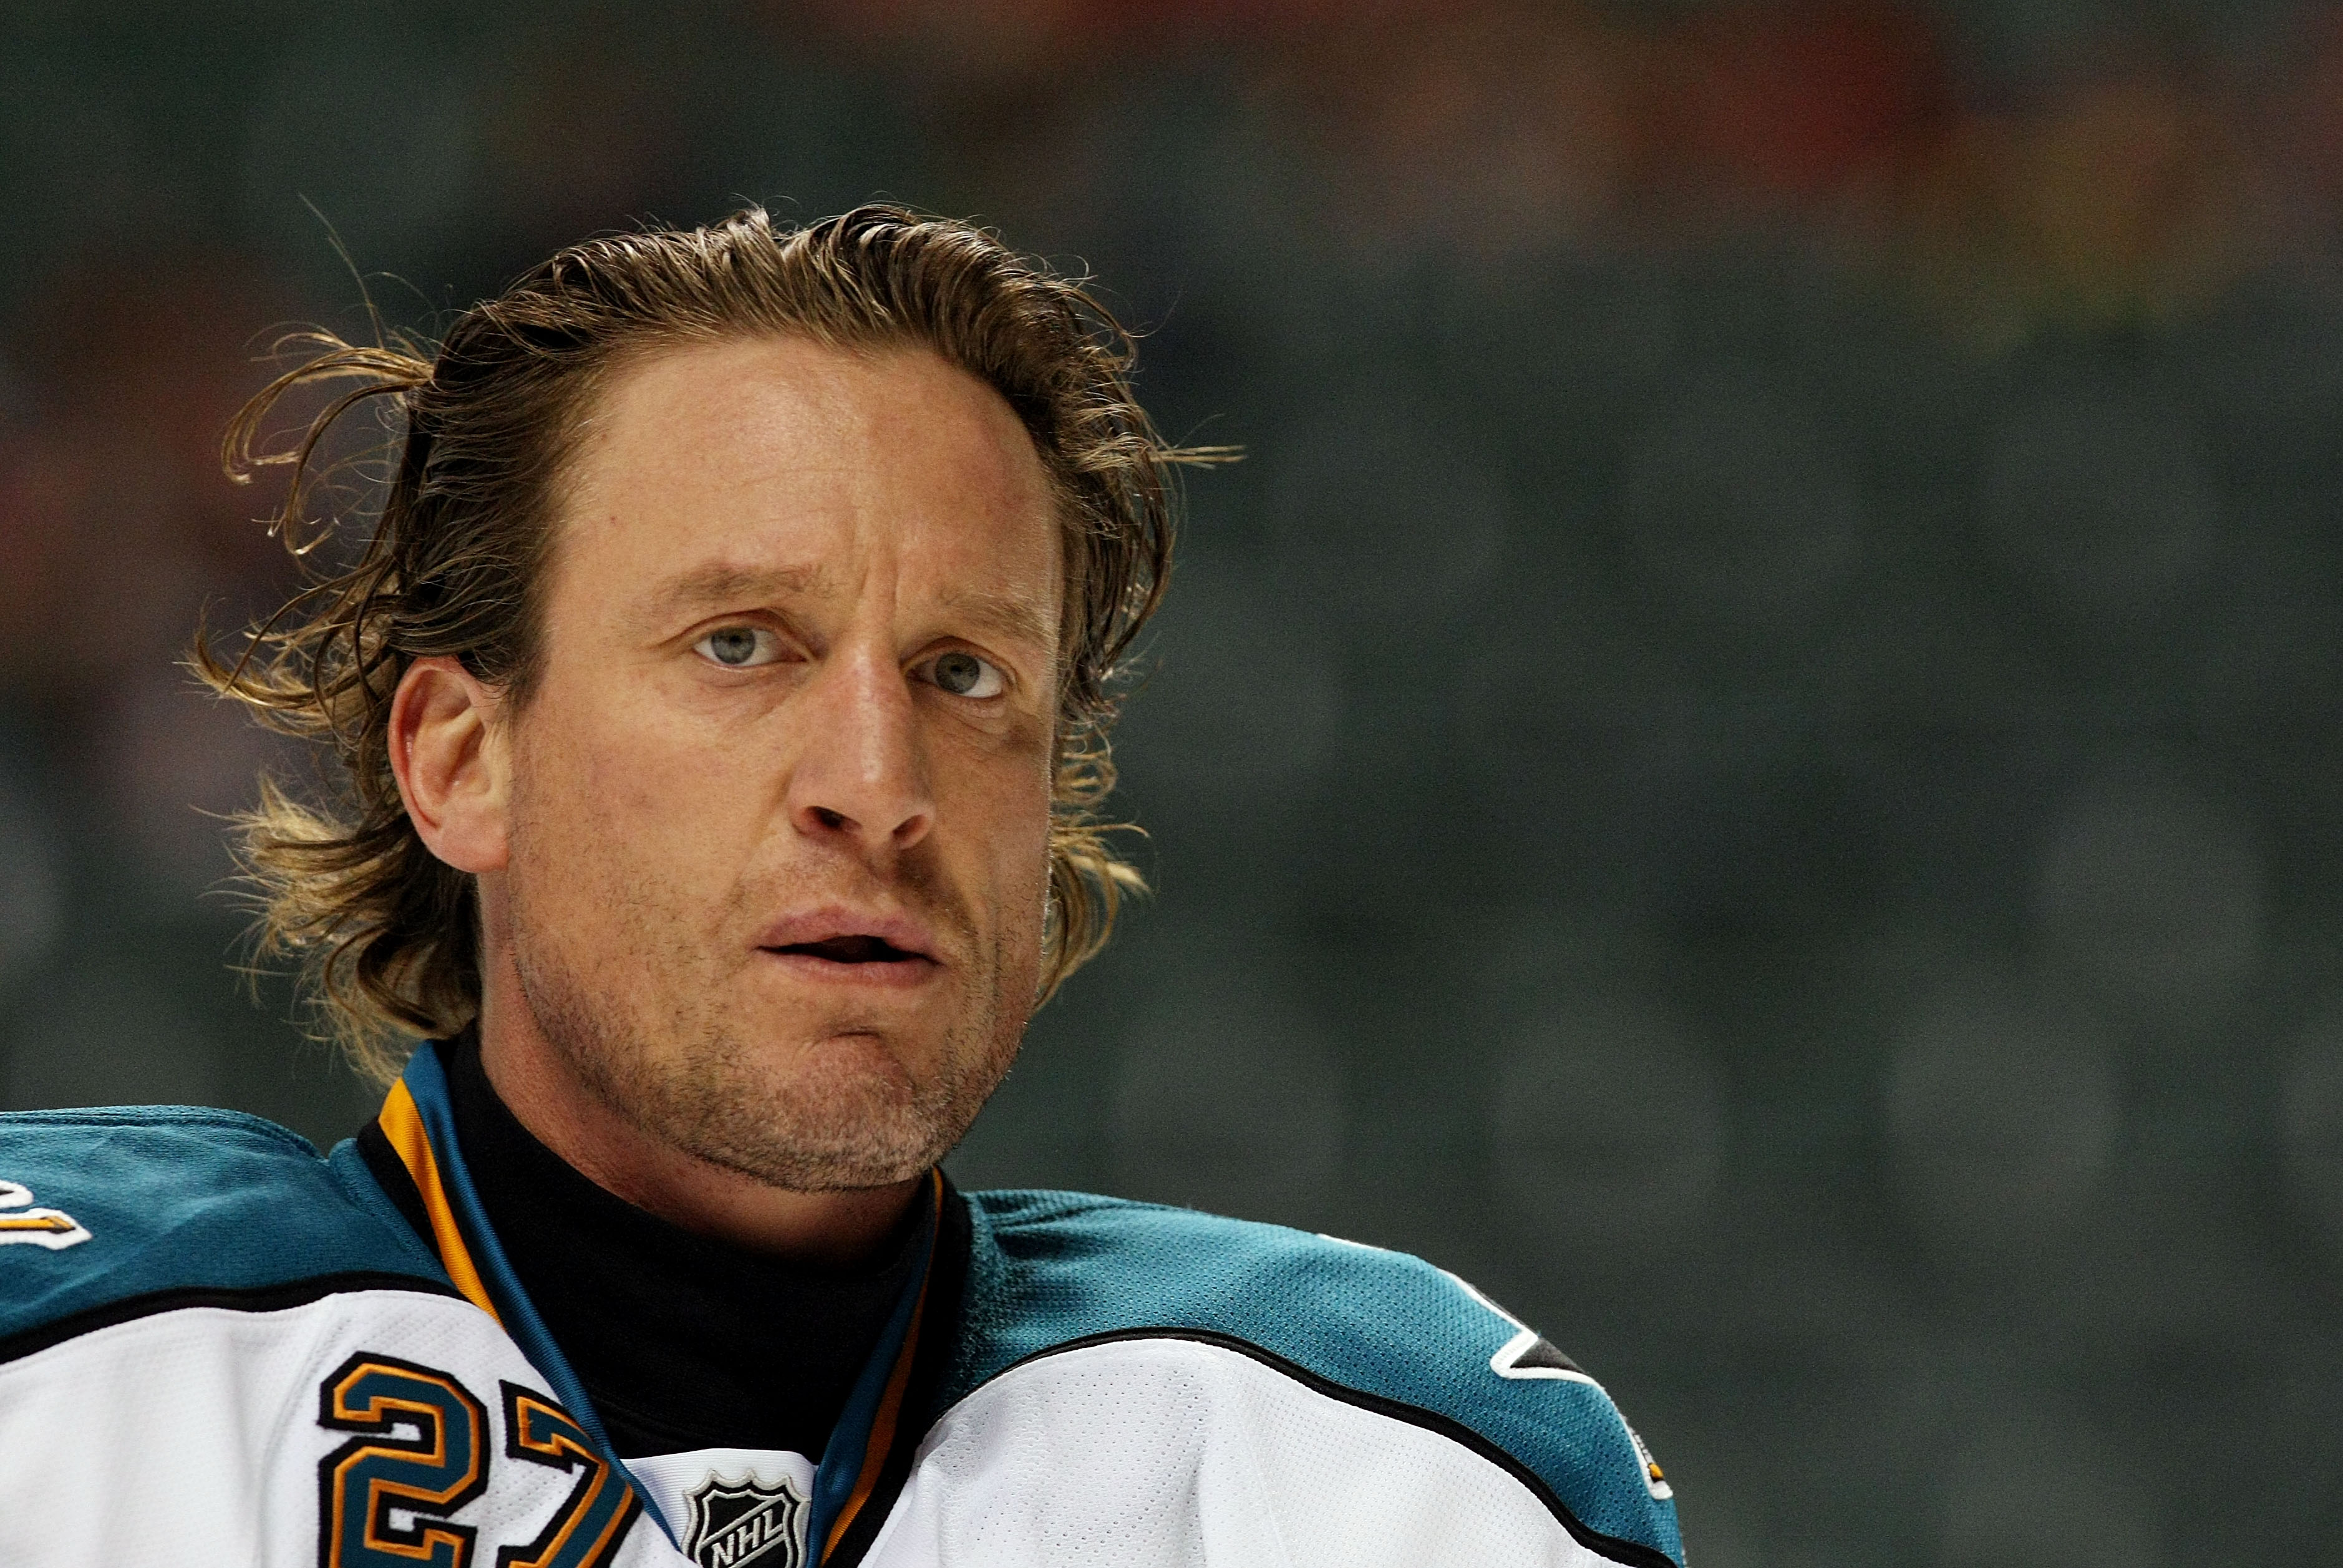 Former NHL great Jeremy Roenick drives ball off tee hanging out of